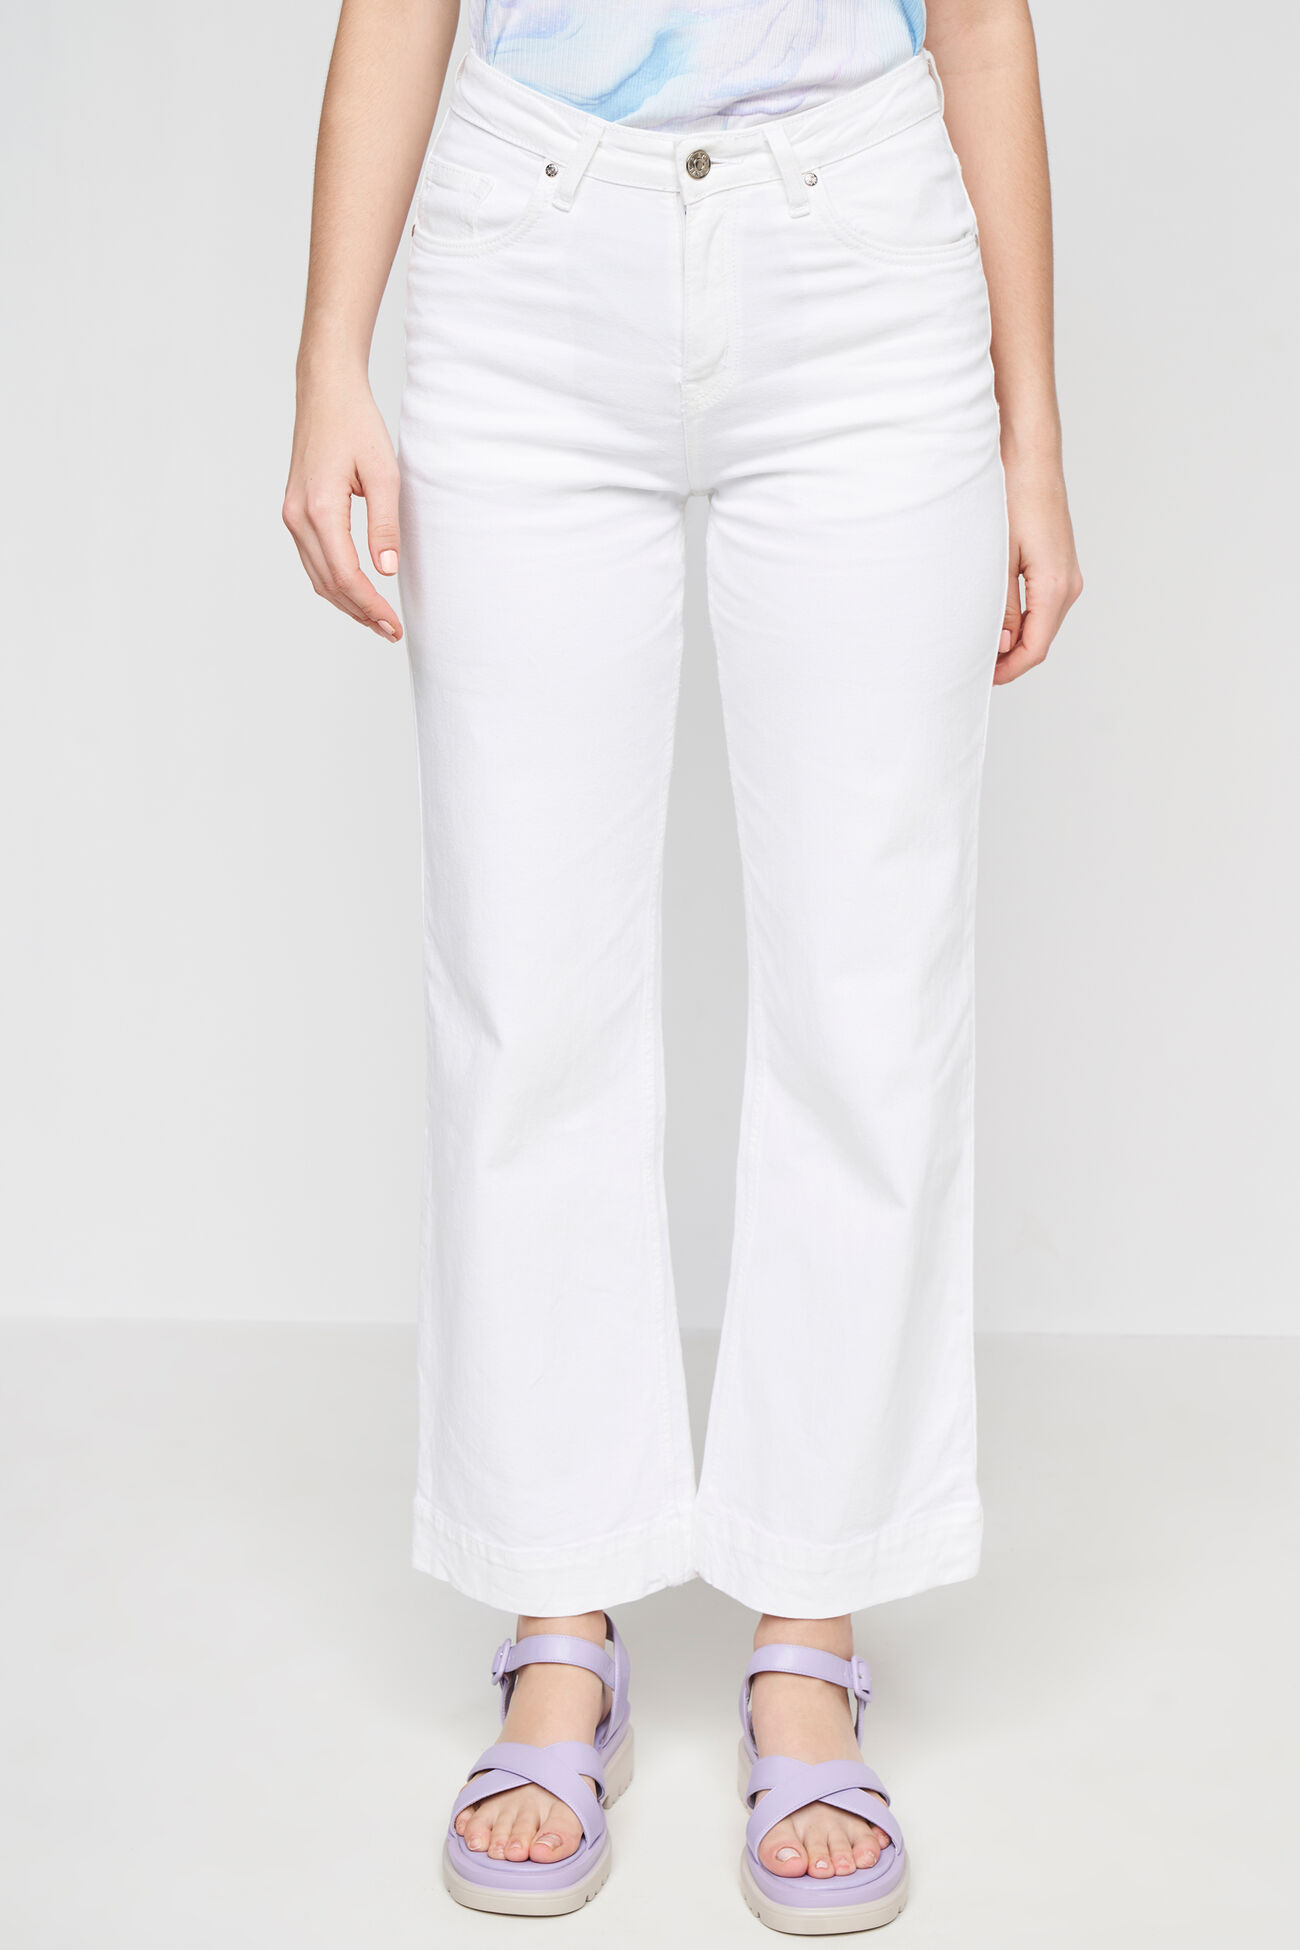 Buy White Solid Straight Bottom Online at Best Price at ANDIndia ...